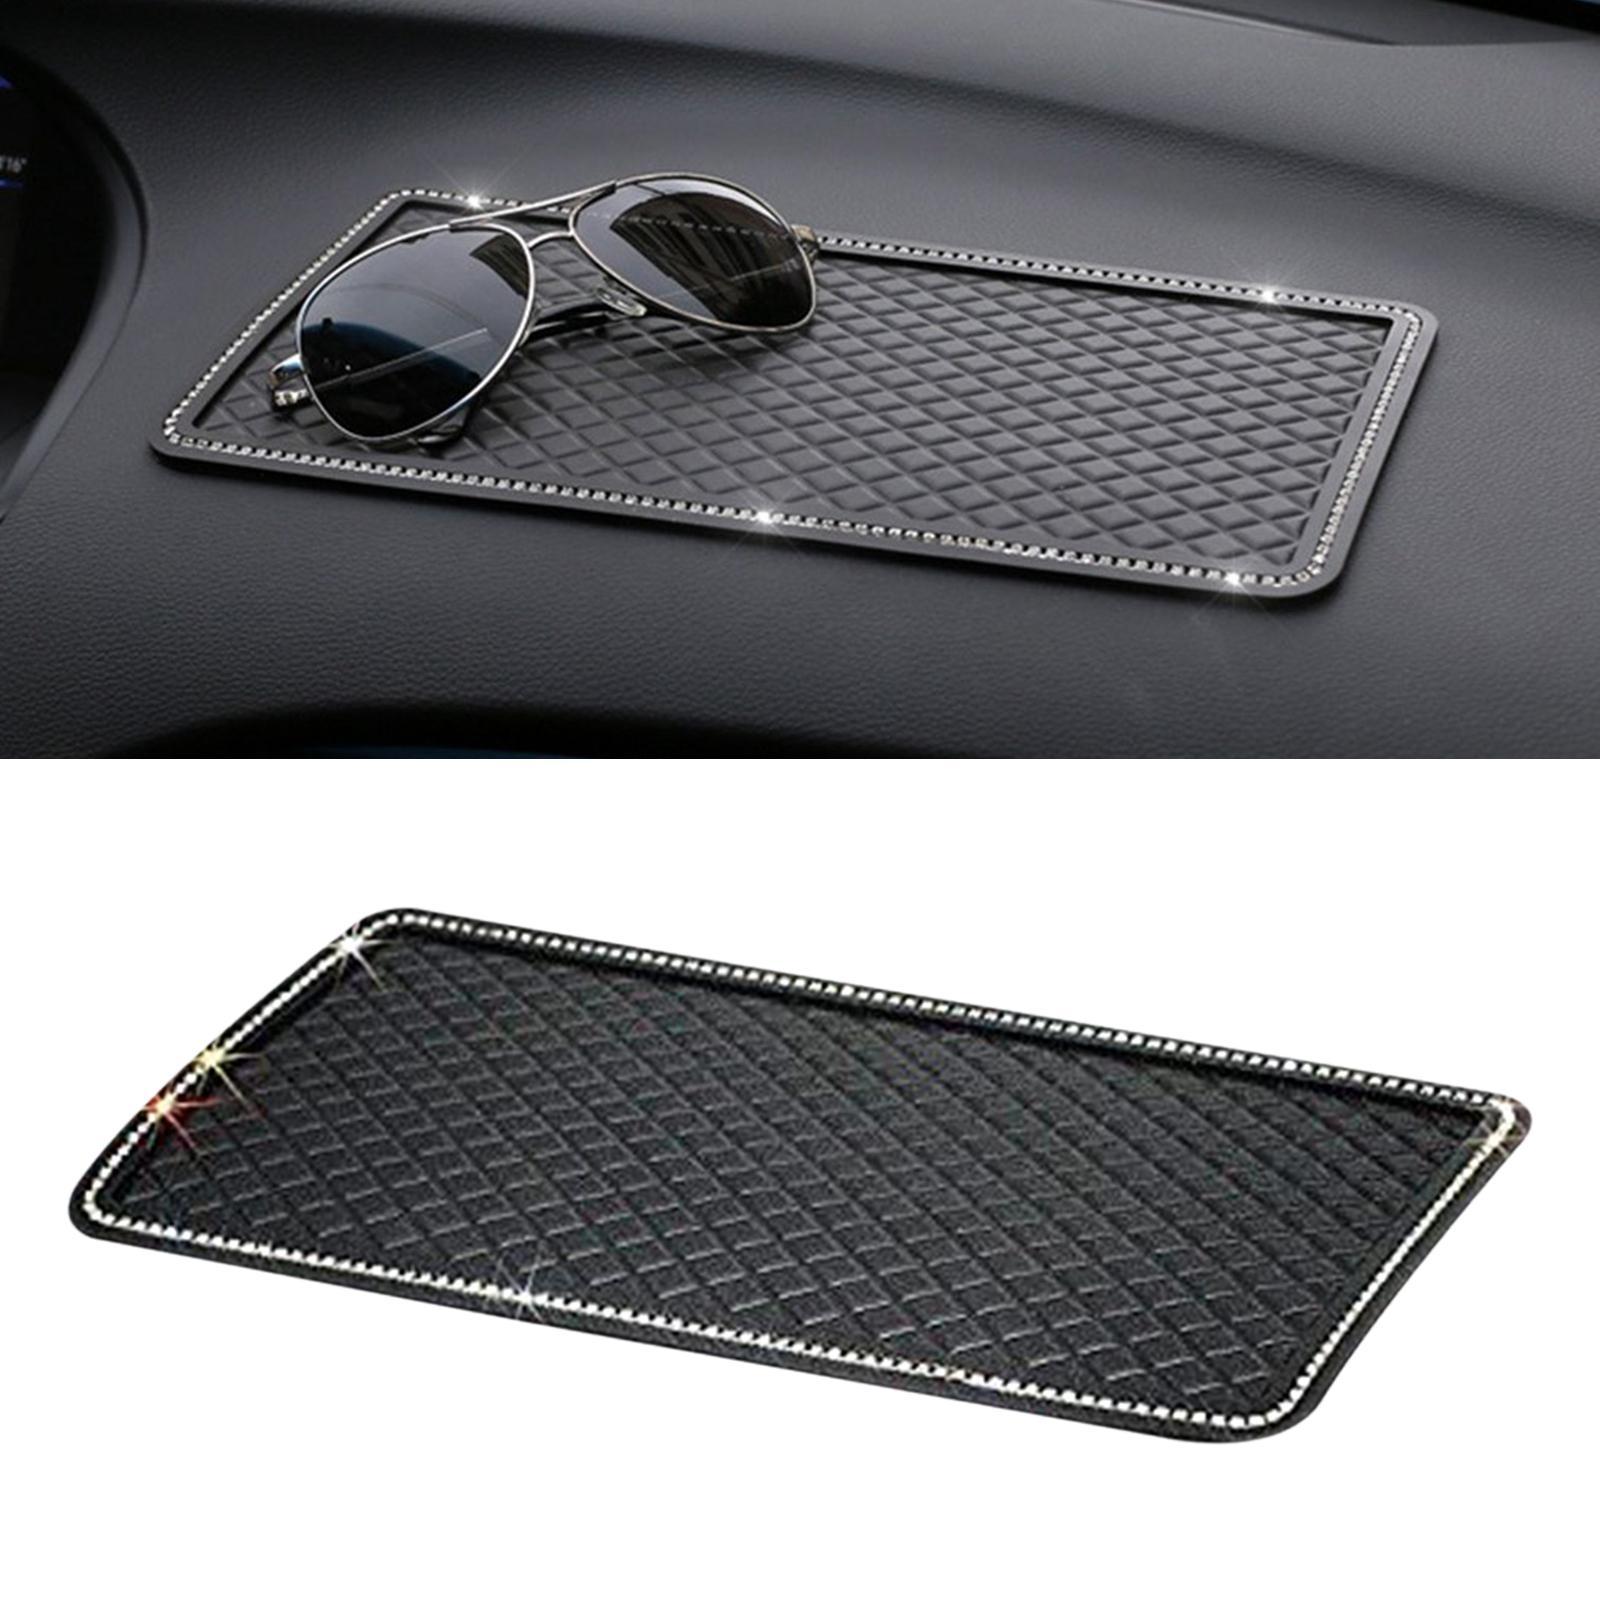 Car Anti Slip Sticky Dashboard Pad Gripping Pad for Phones Electronic Devices